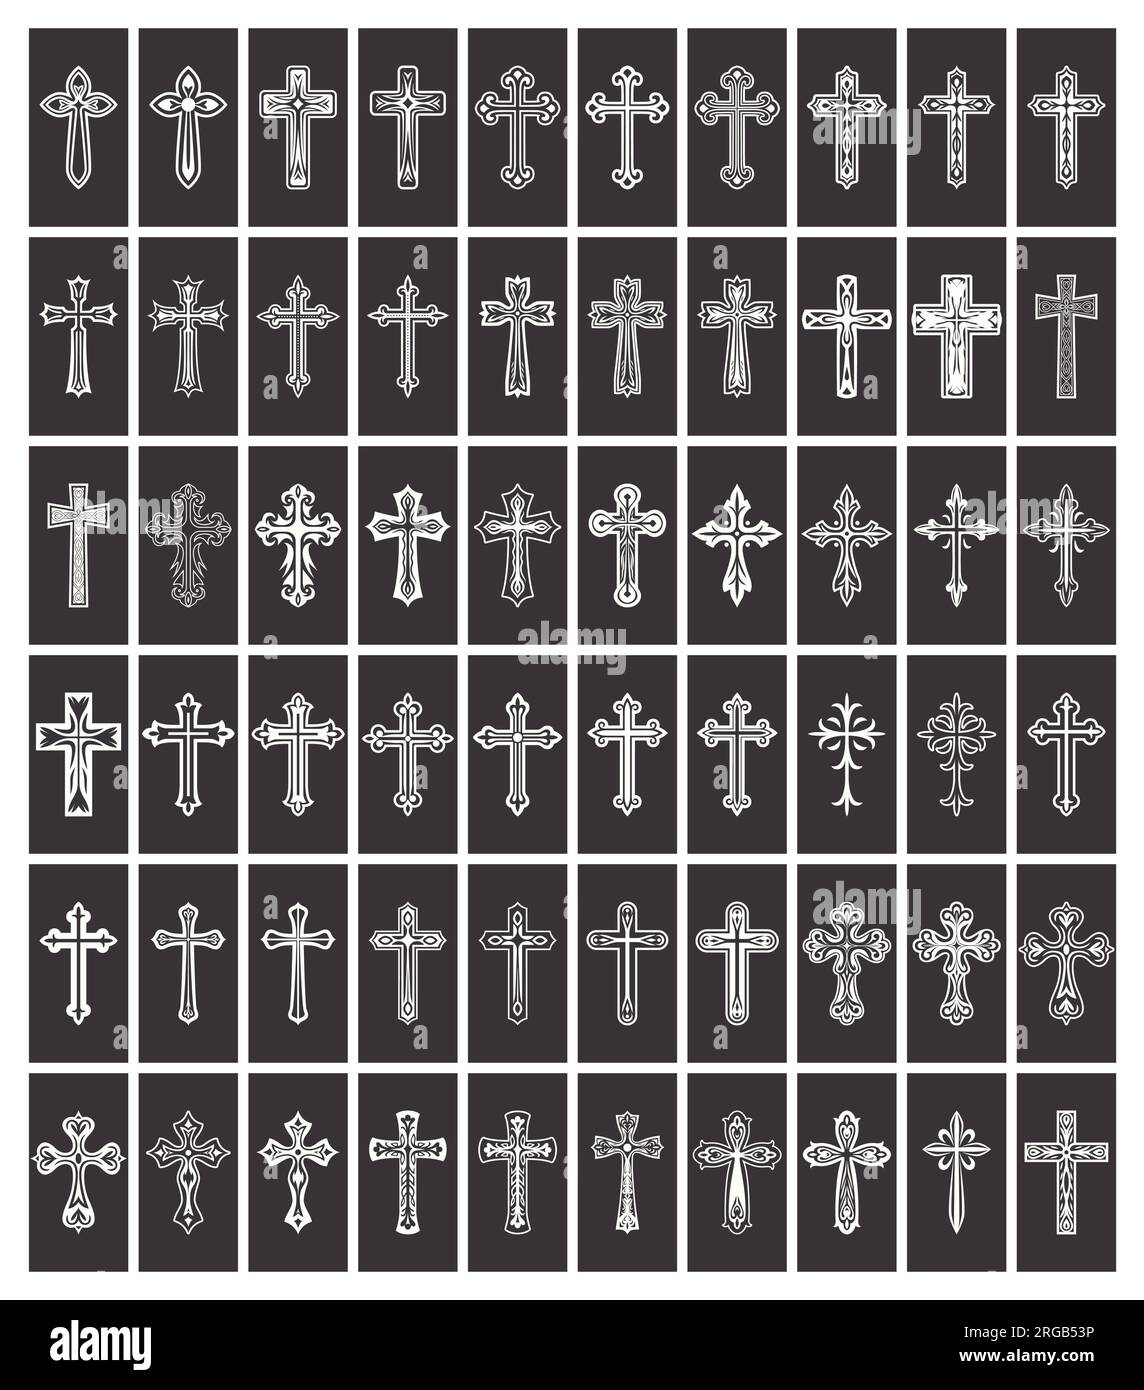 Flat Vector Black and White Christian Cross Icons. Line Silhouette Cut ...